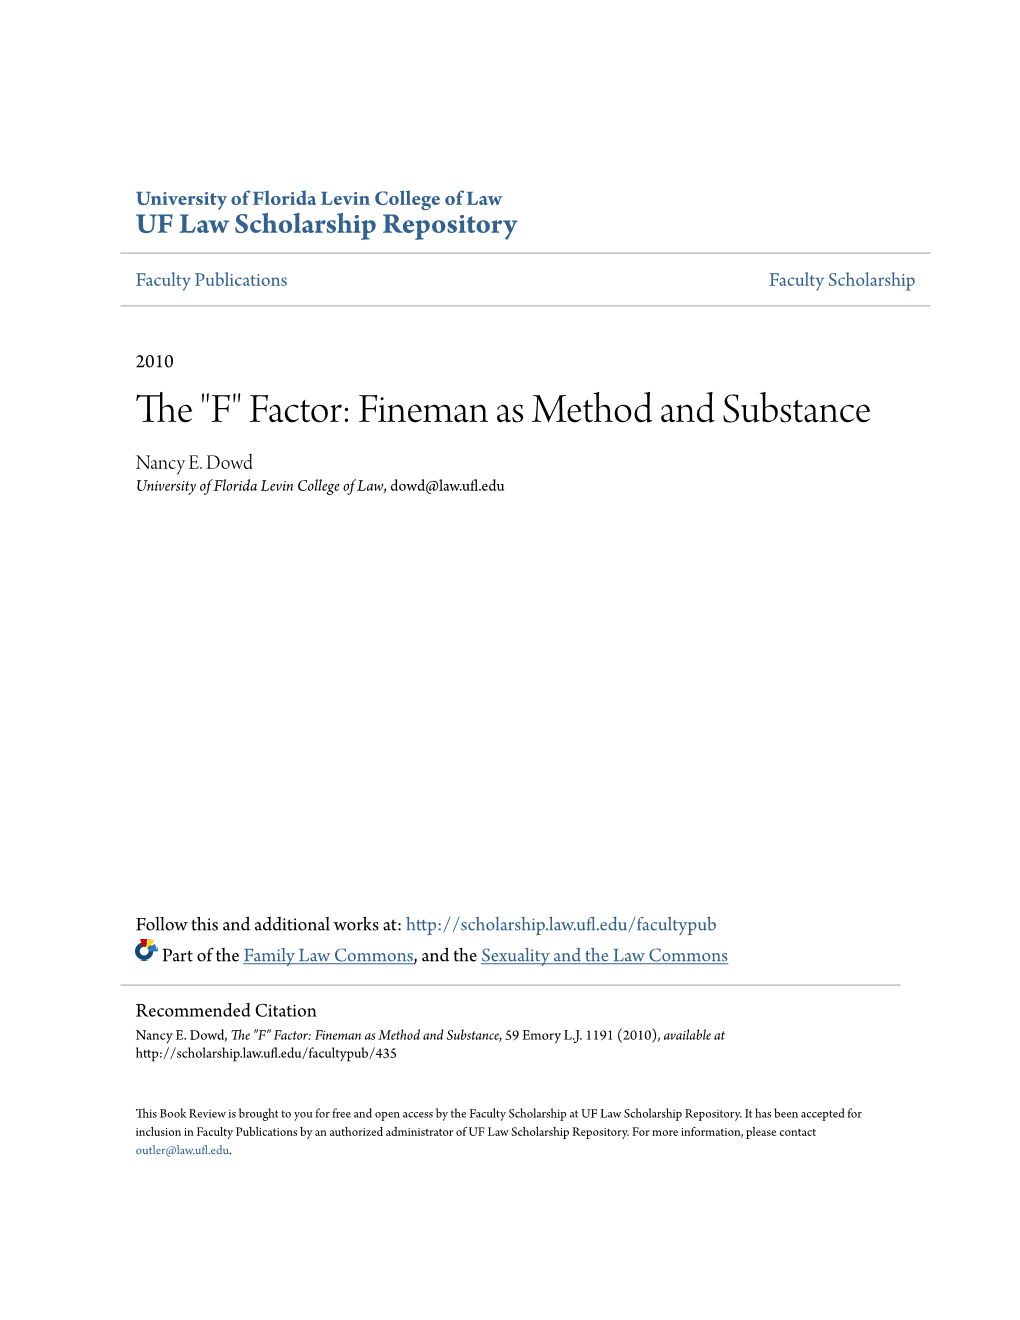 The "F" Factor: Fineman As Method and Substance Nancy E